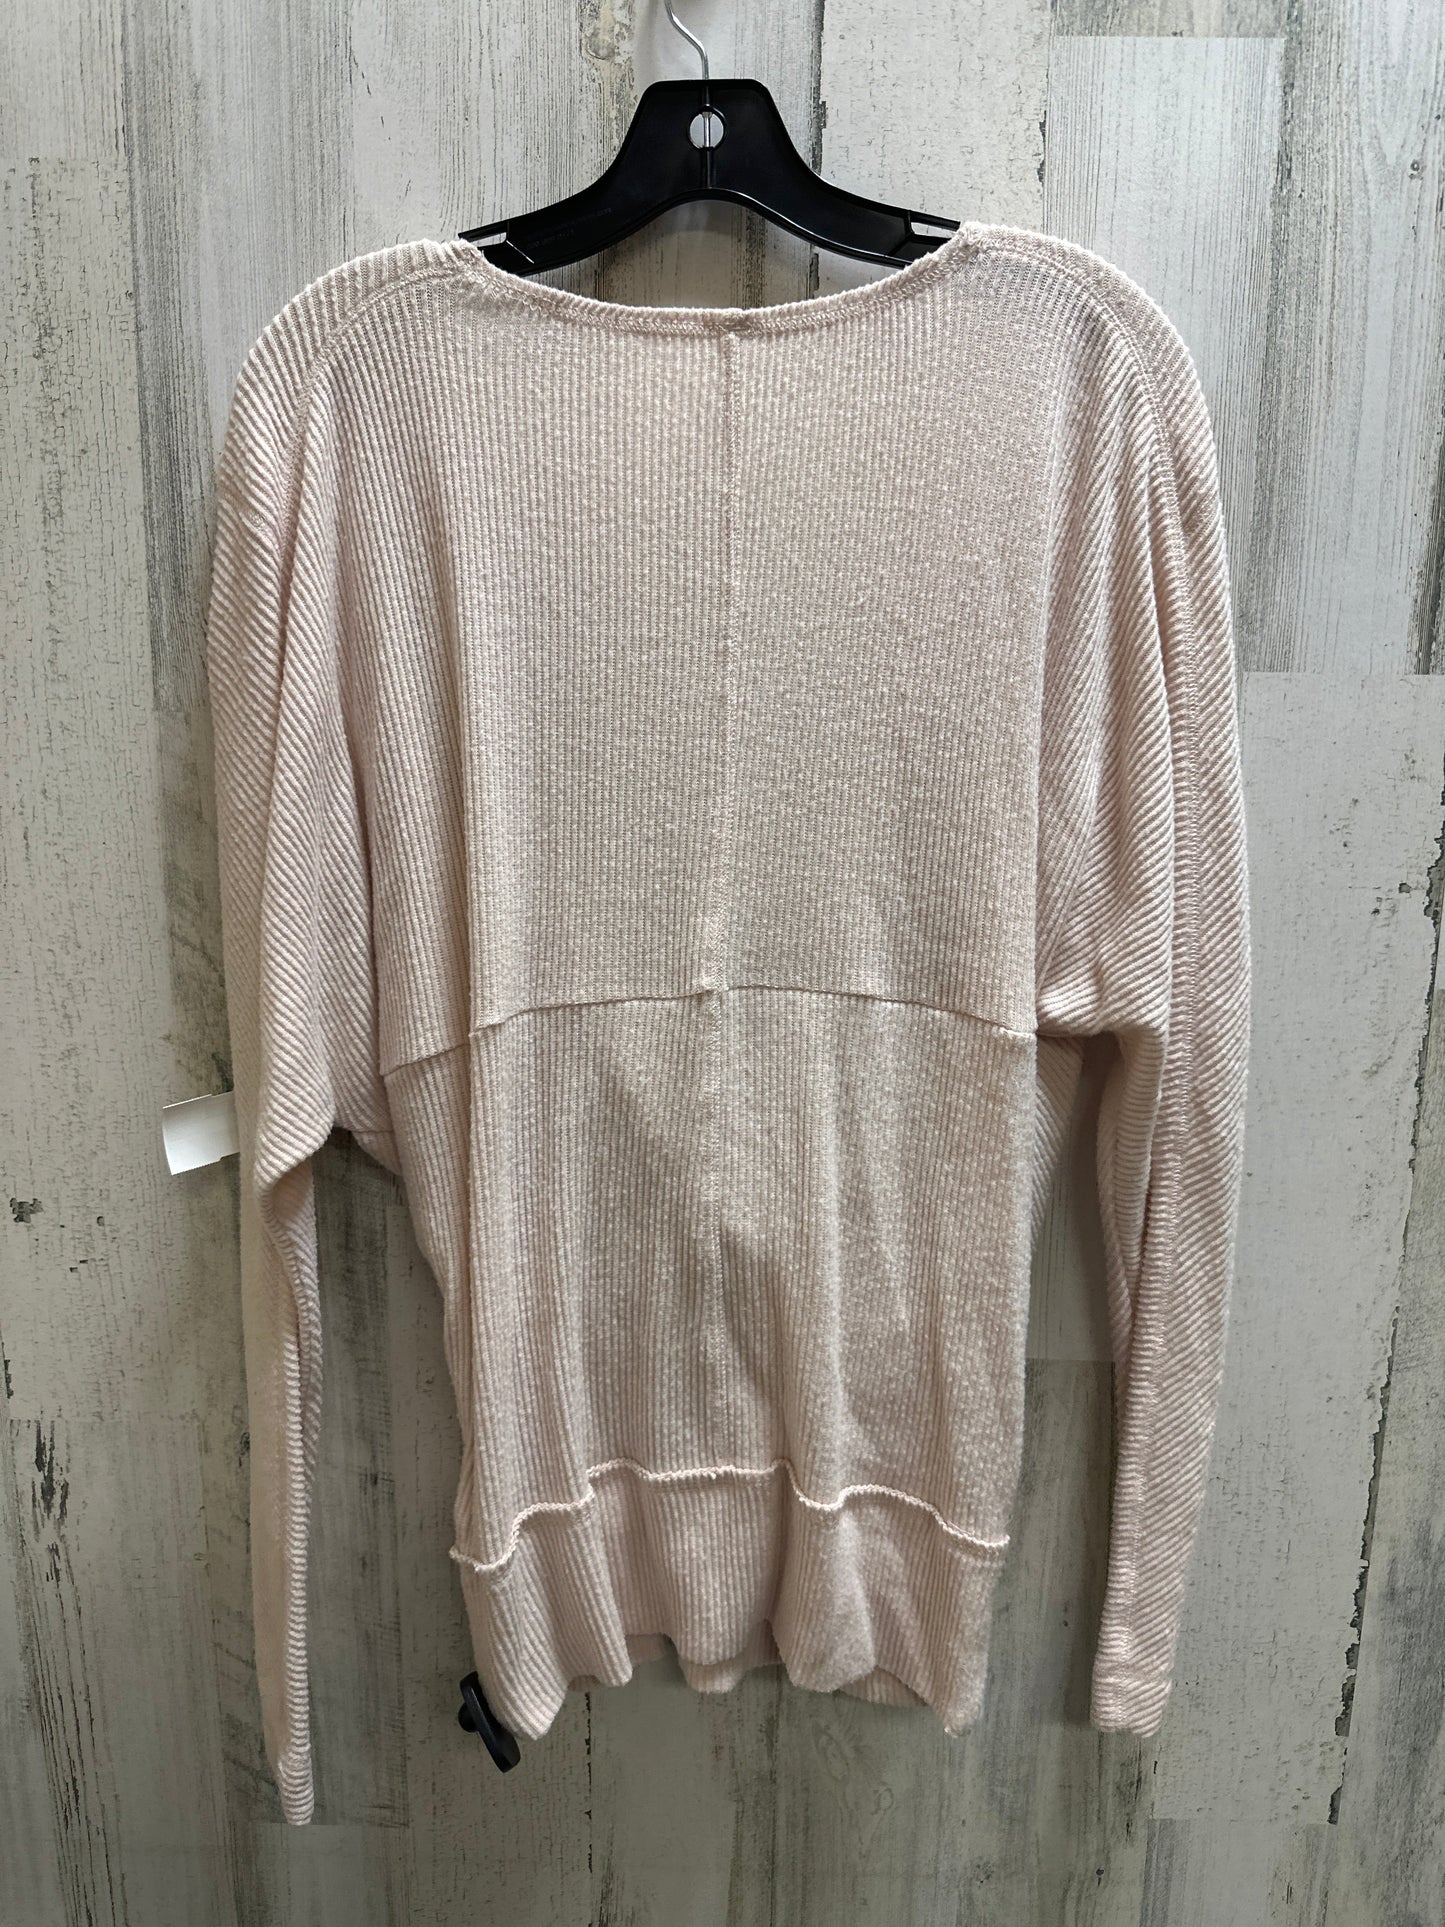 Pink Top Long Sleeve Free People, Size Xs